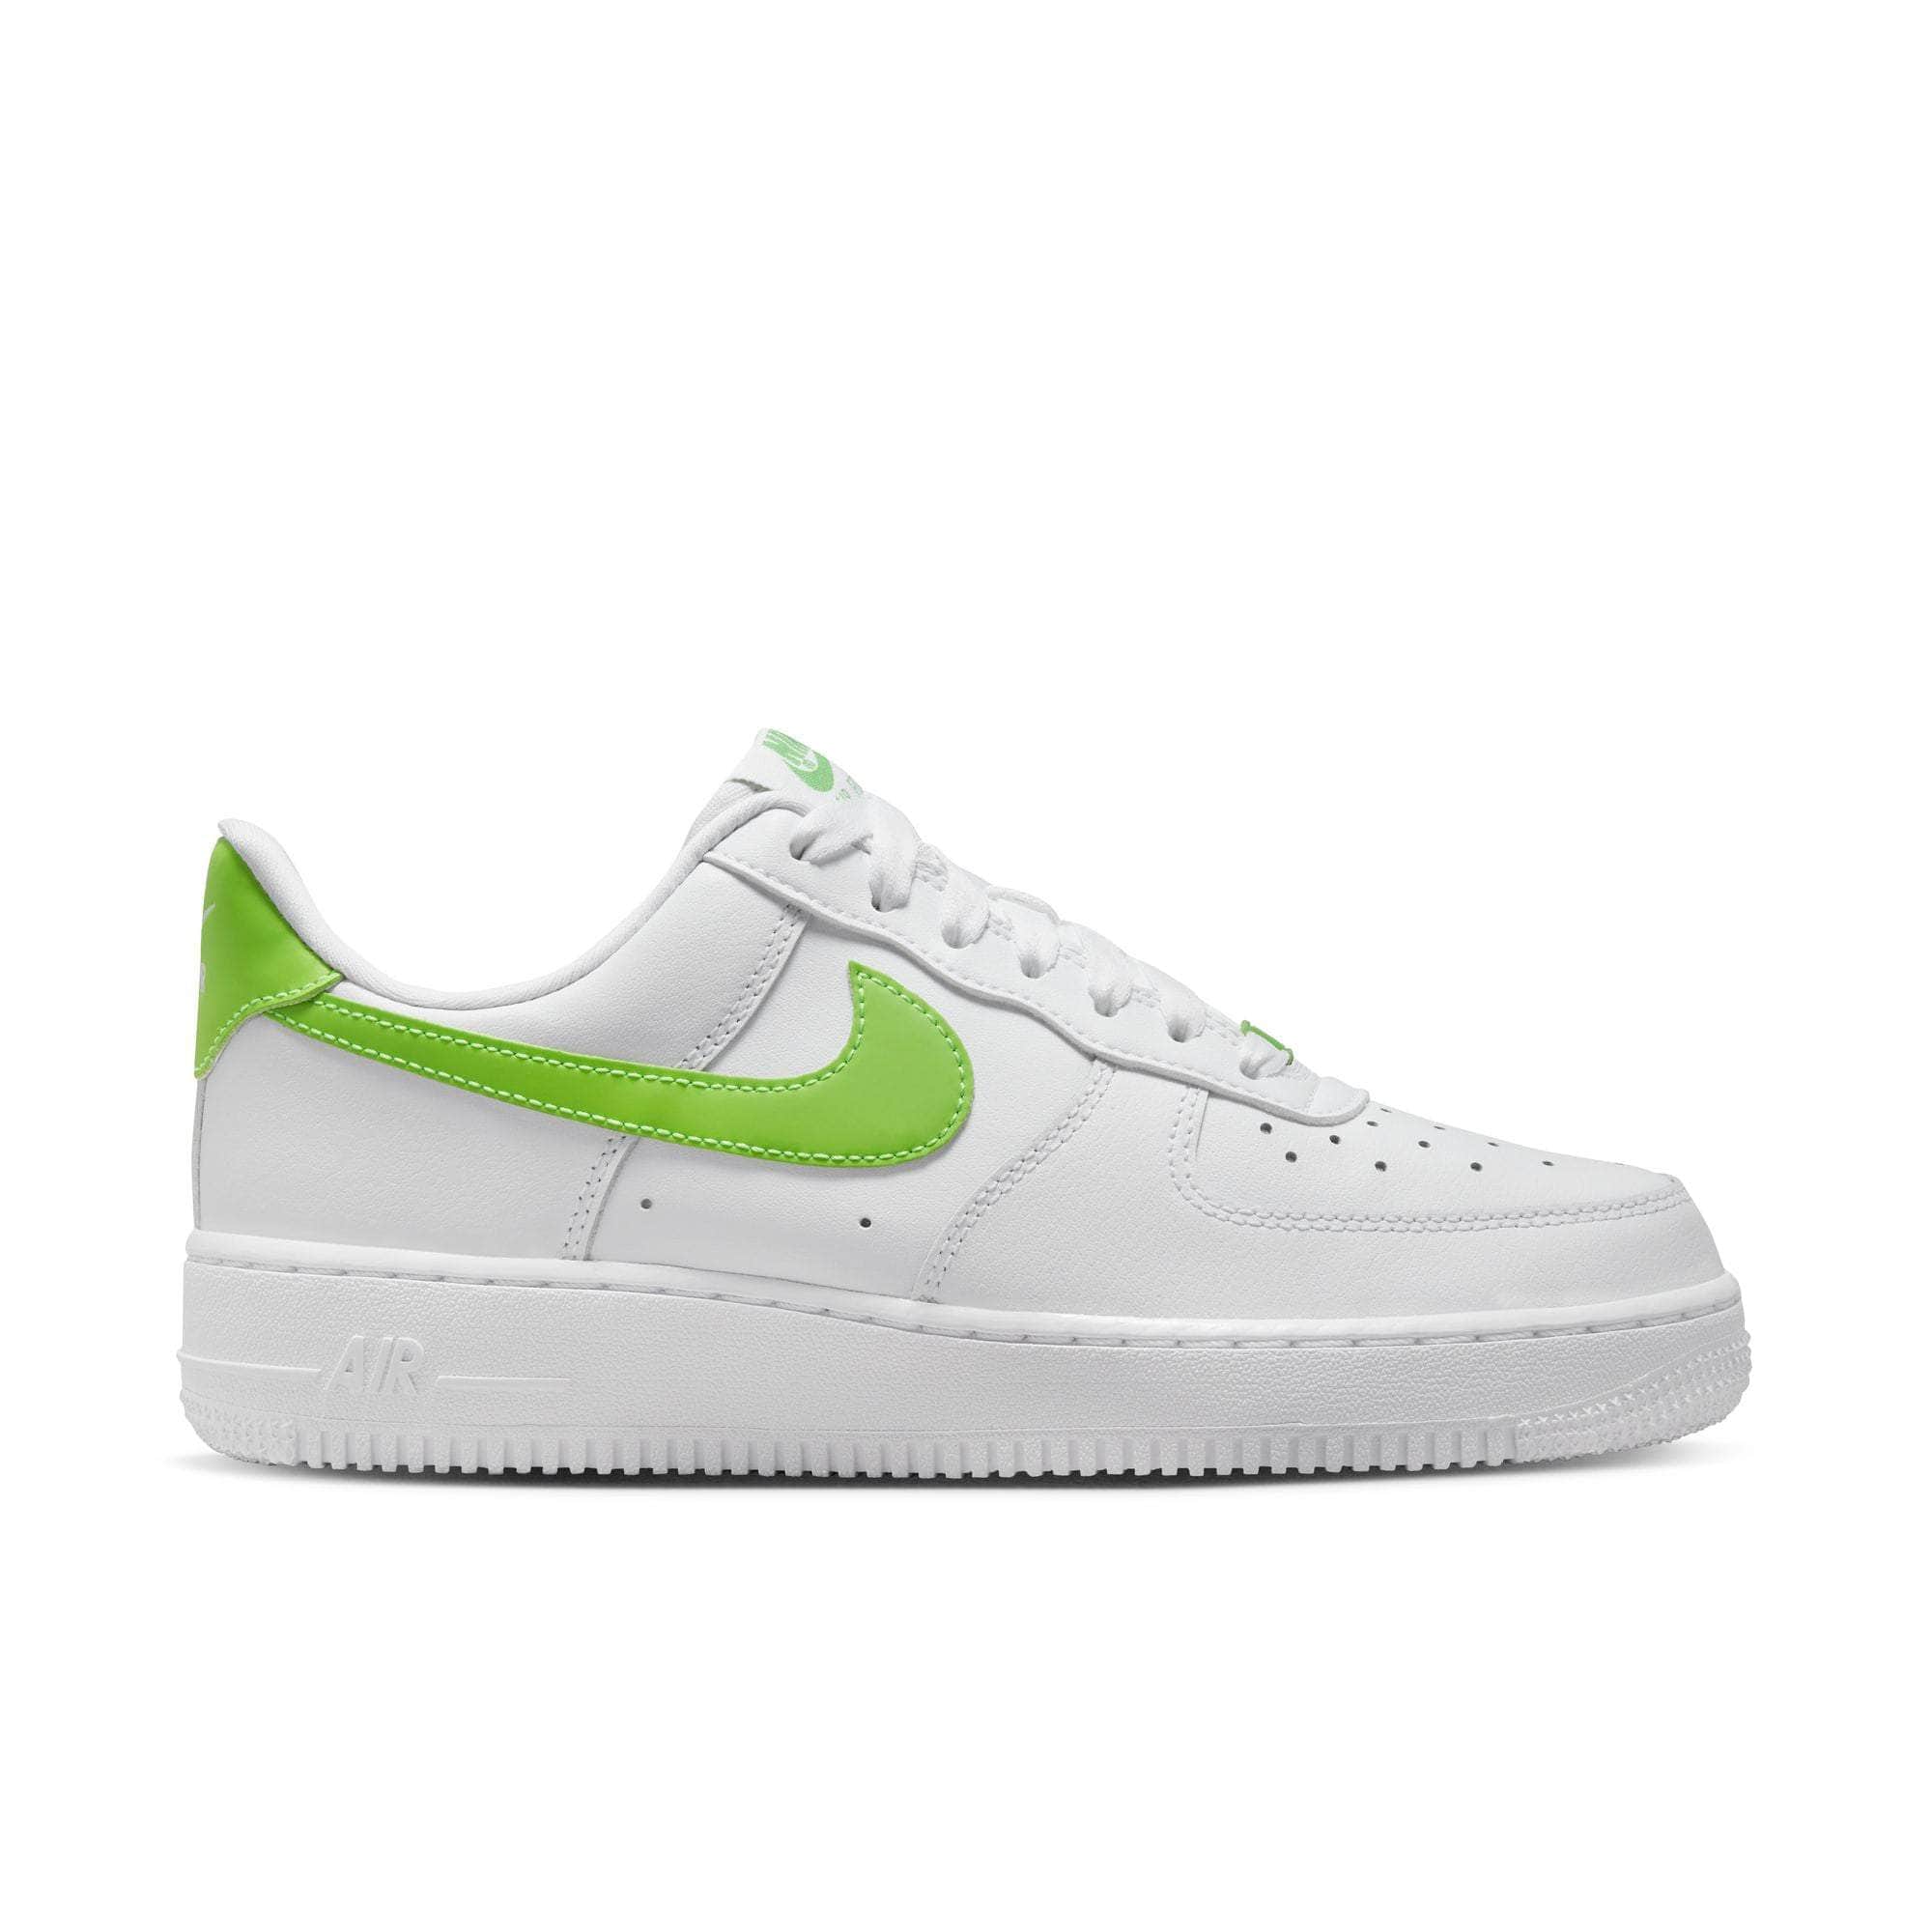 Nike Air Force 1 '07 - Women's - GBNY